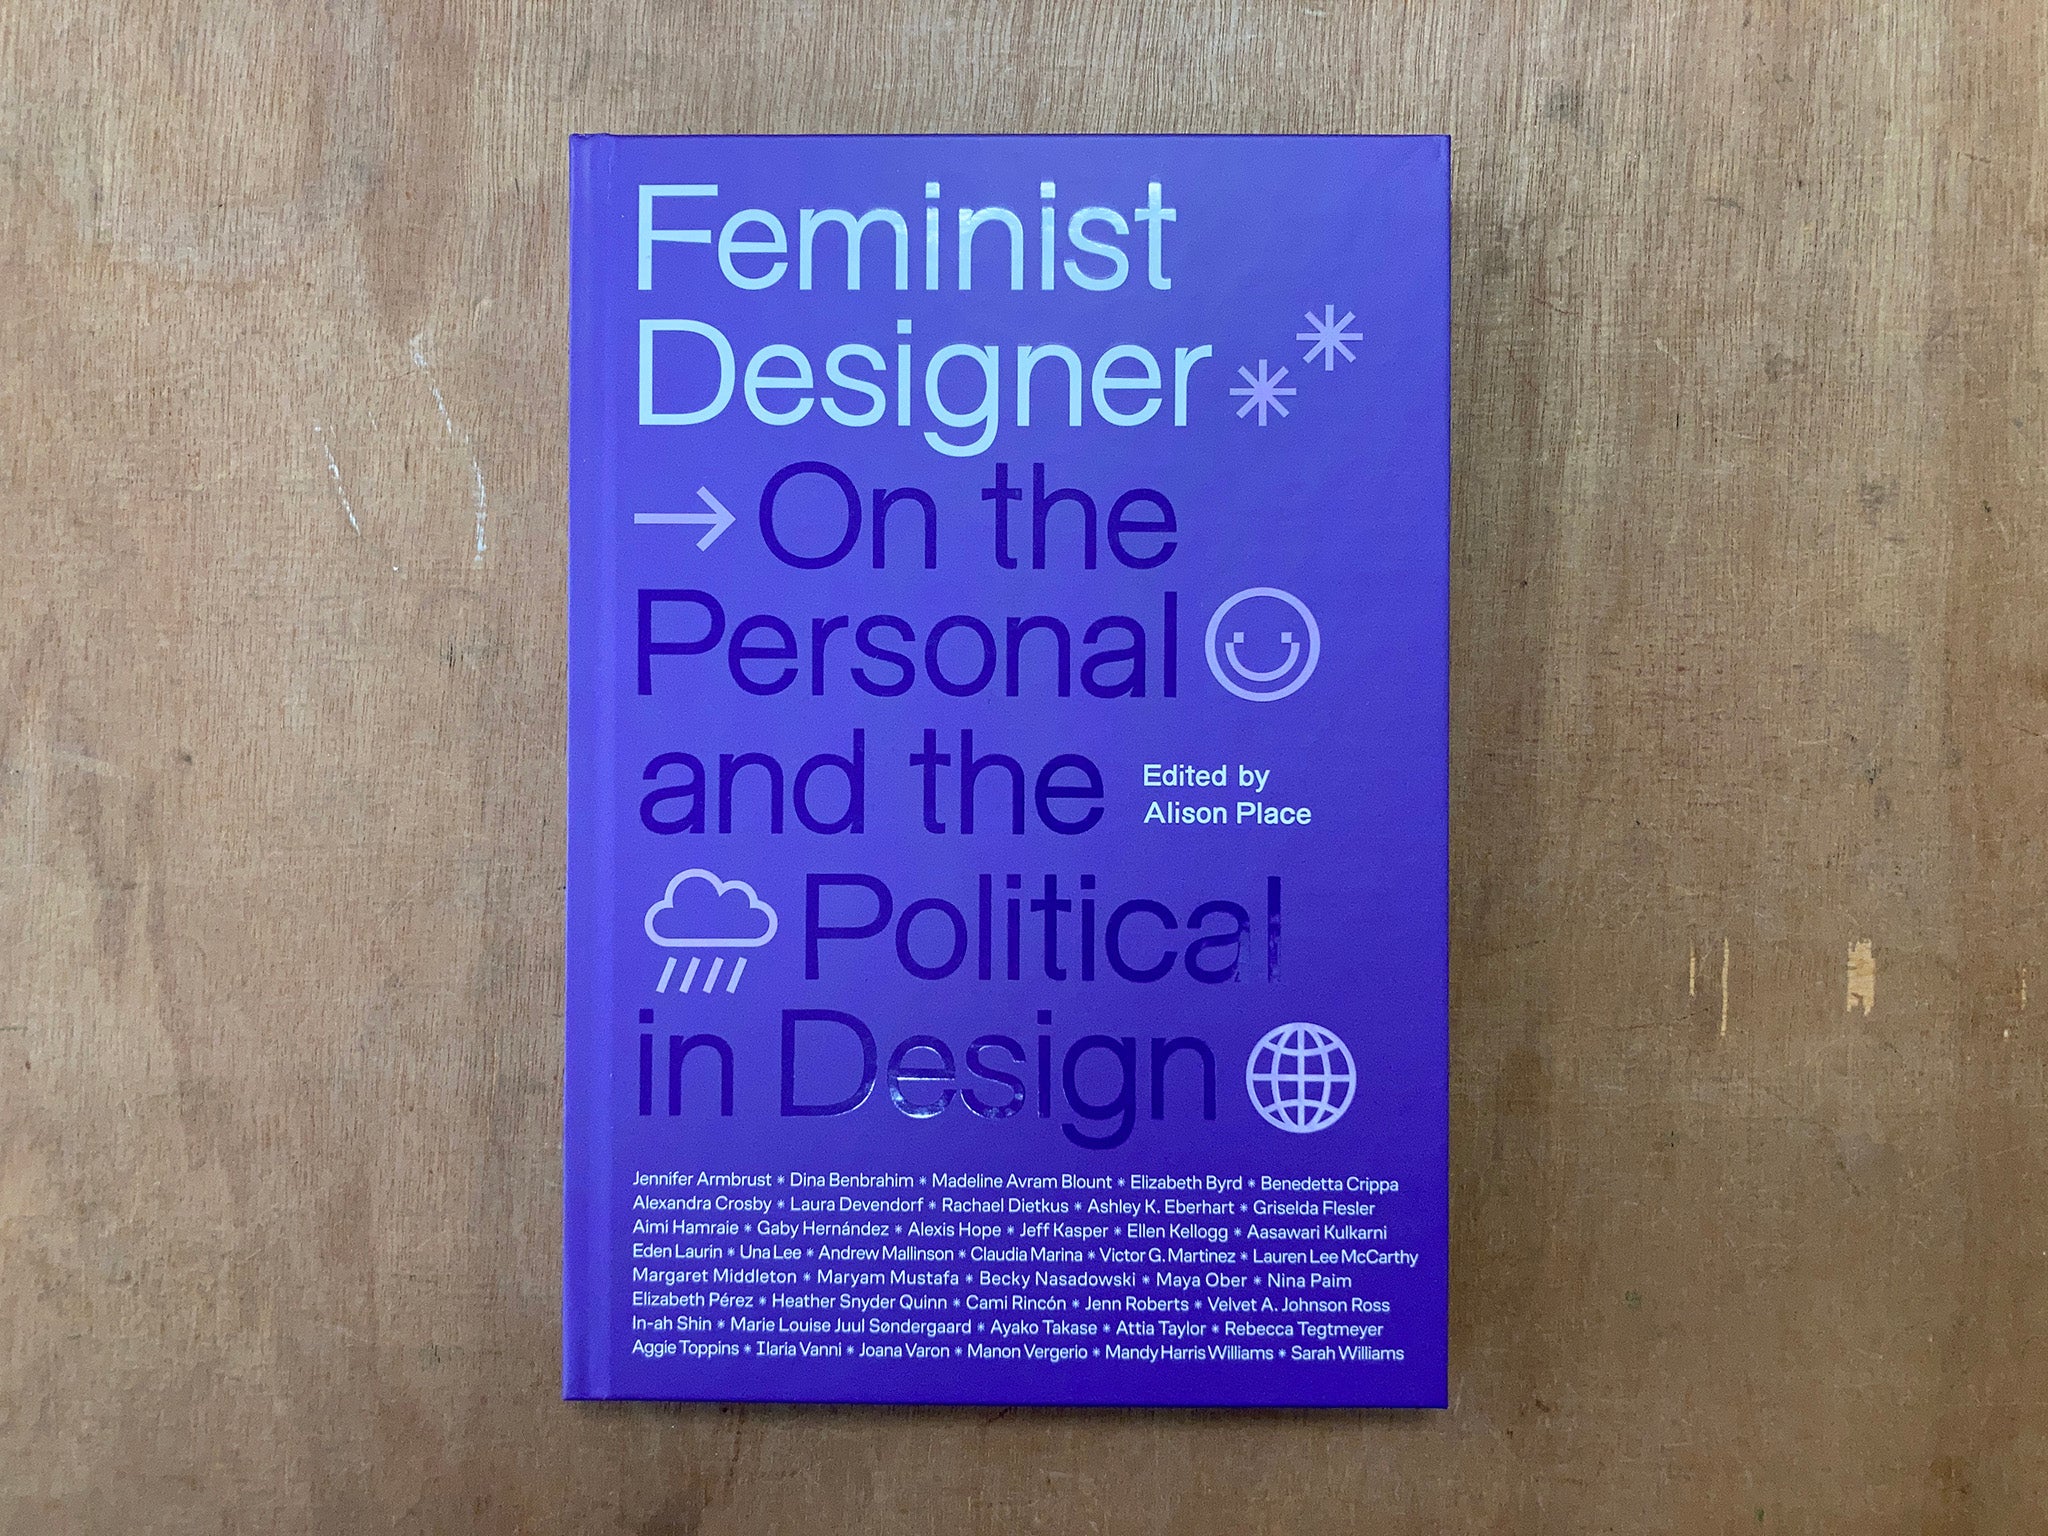 FEMINIST DESIGNER: ON THE PERSONAL AND THE POLITICAL IN DESIGN edited by Alison Place